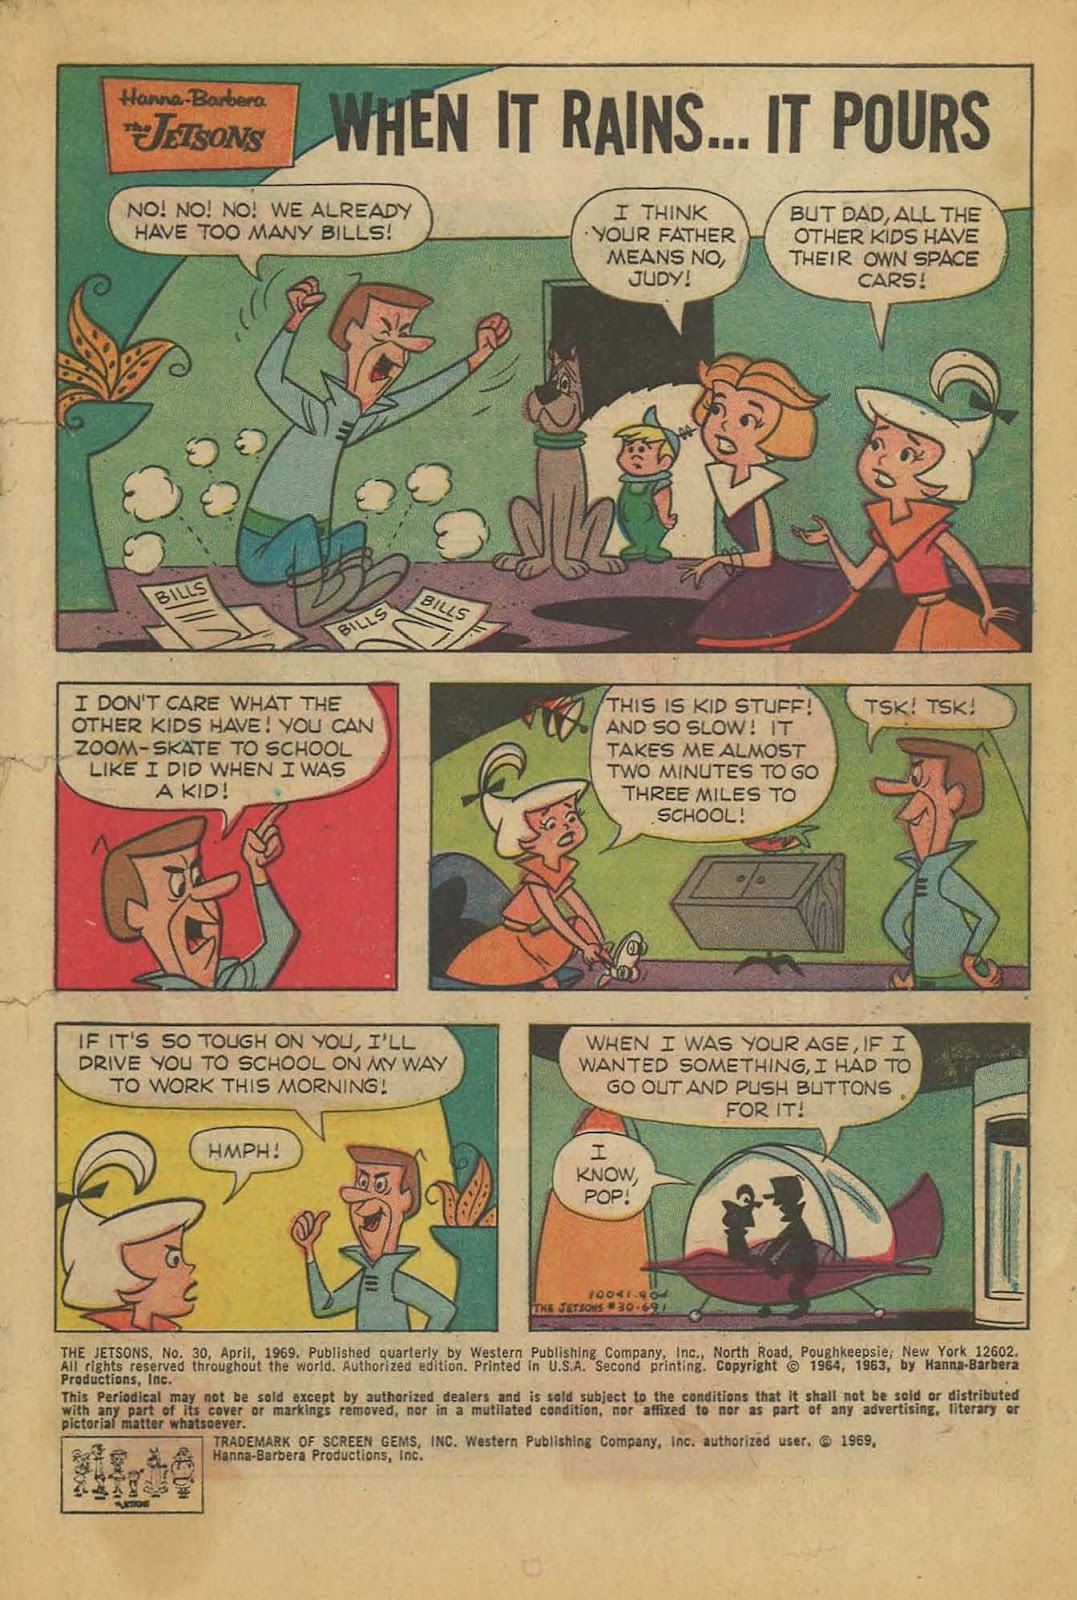 The Jetsons 30 | Read The Jetsons 30 comic online in high quality. Read  Full Comic online for free - Read comics online in high quality .| READ  COMIC ONLINE